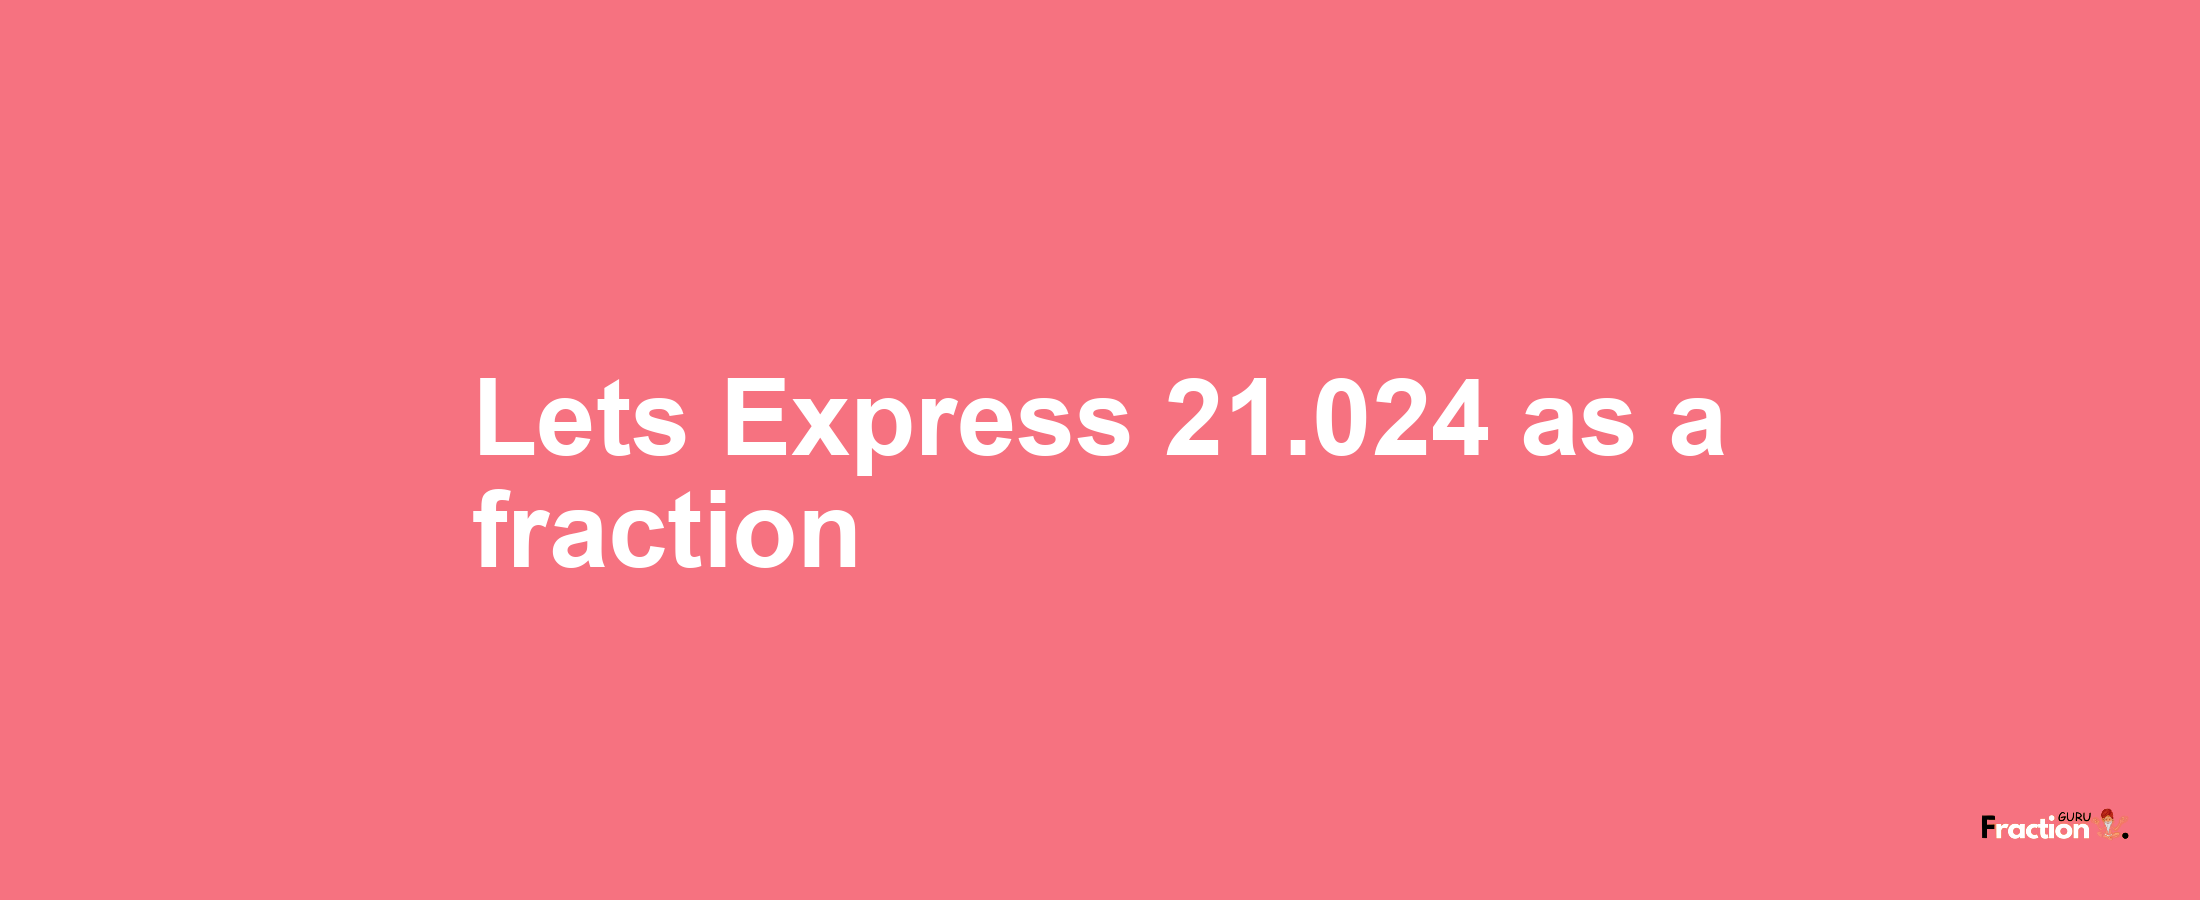 Lets Express 21.024 as afraction